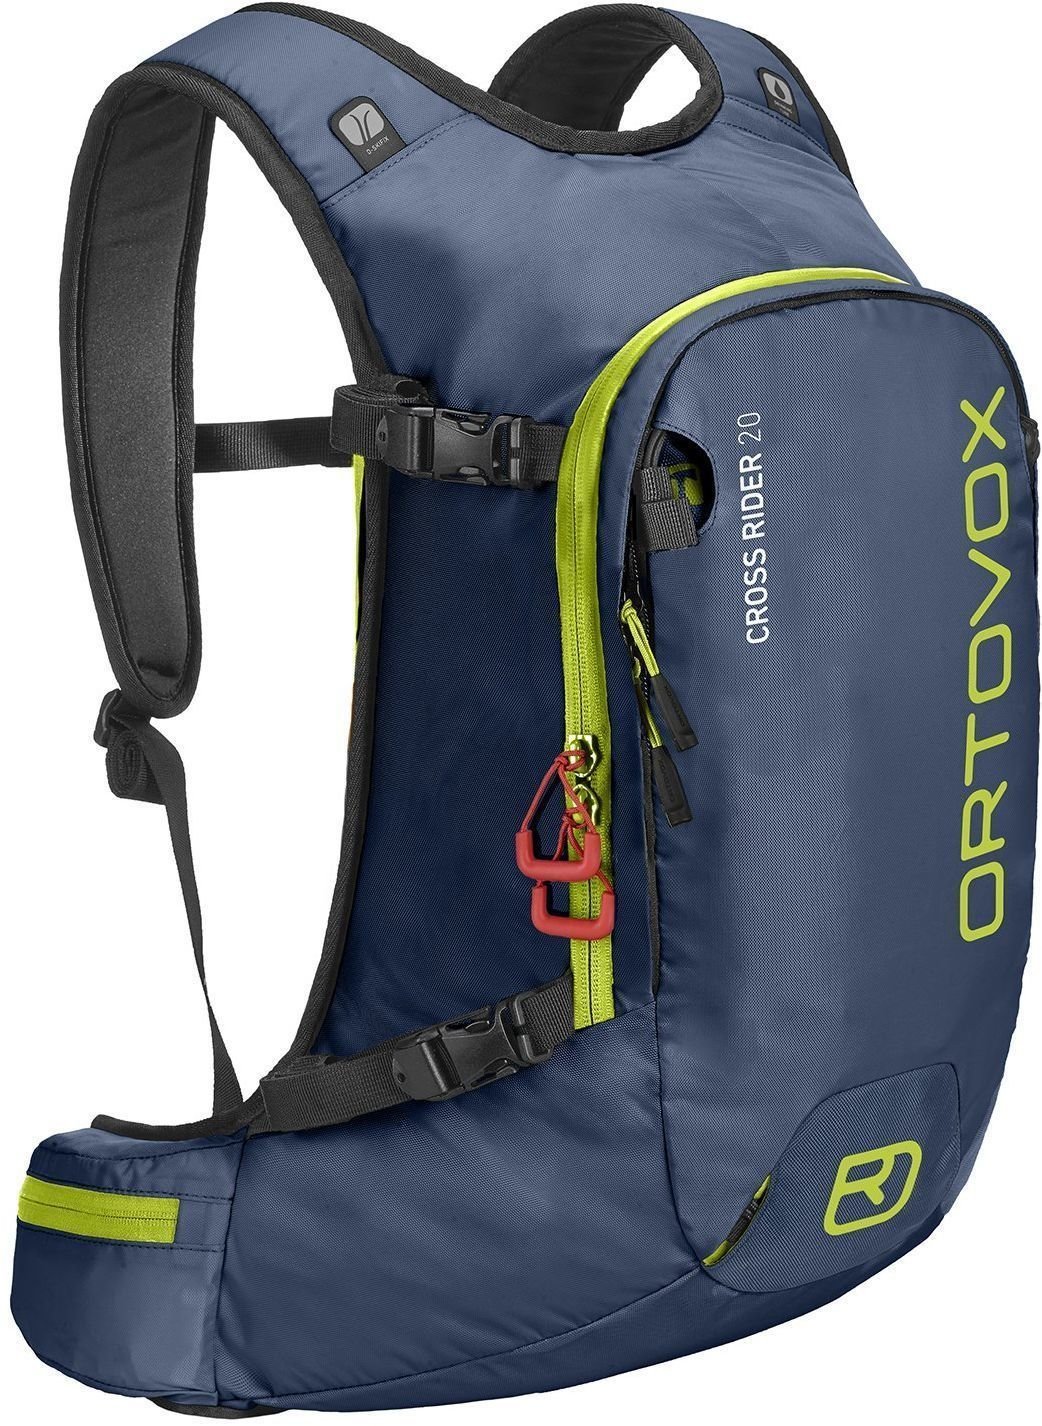 Outdoor Backpack Ortovox Cross Rider 20 Night Blue Outdoor Backpack